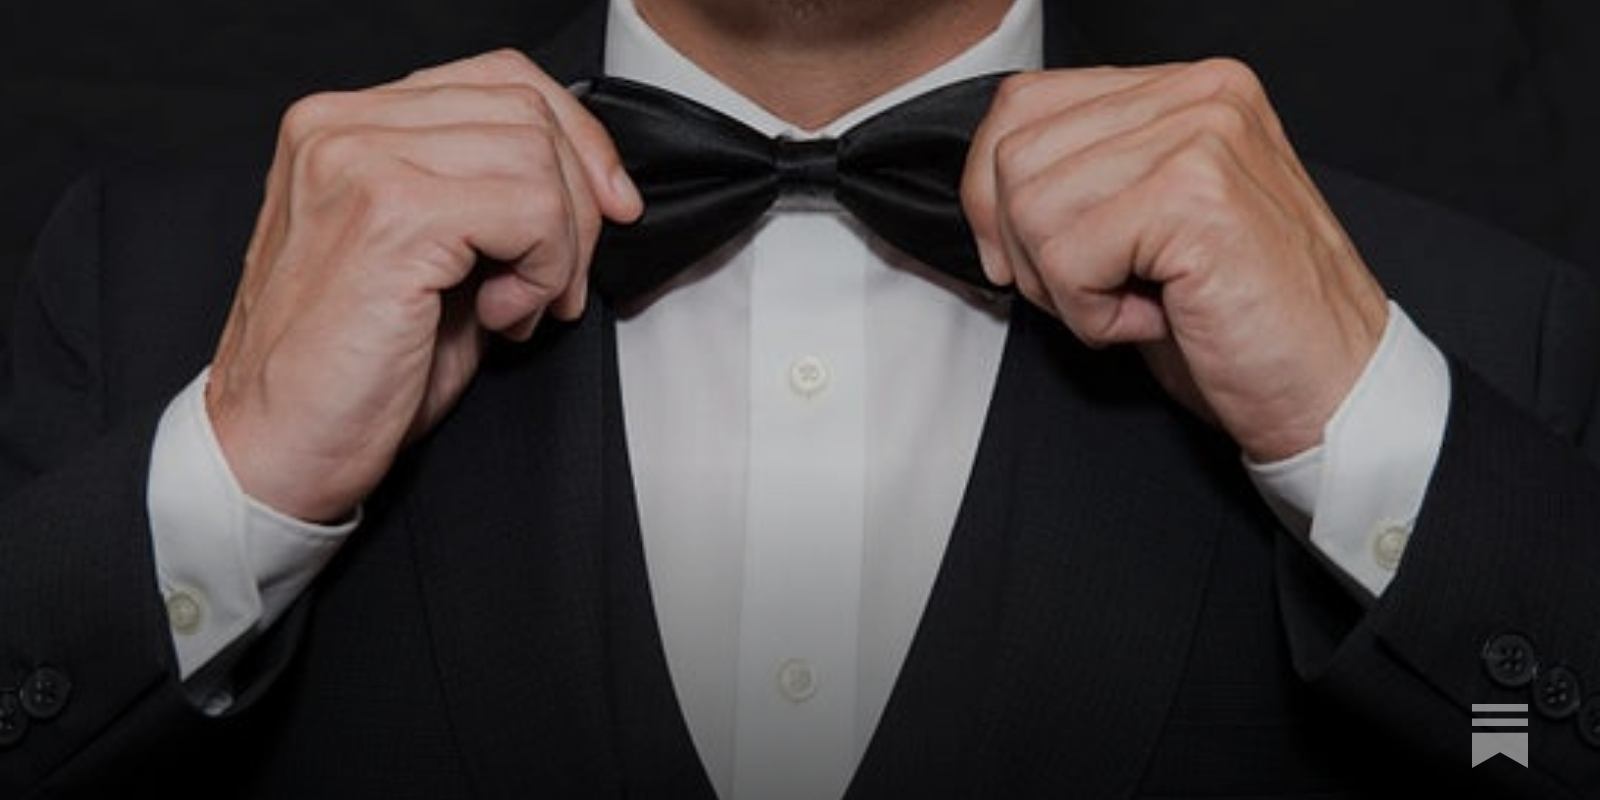 The Capitalist Touch: The Tuxedo's Fresh And Present Evolution